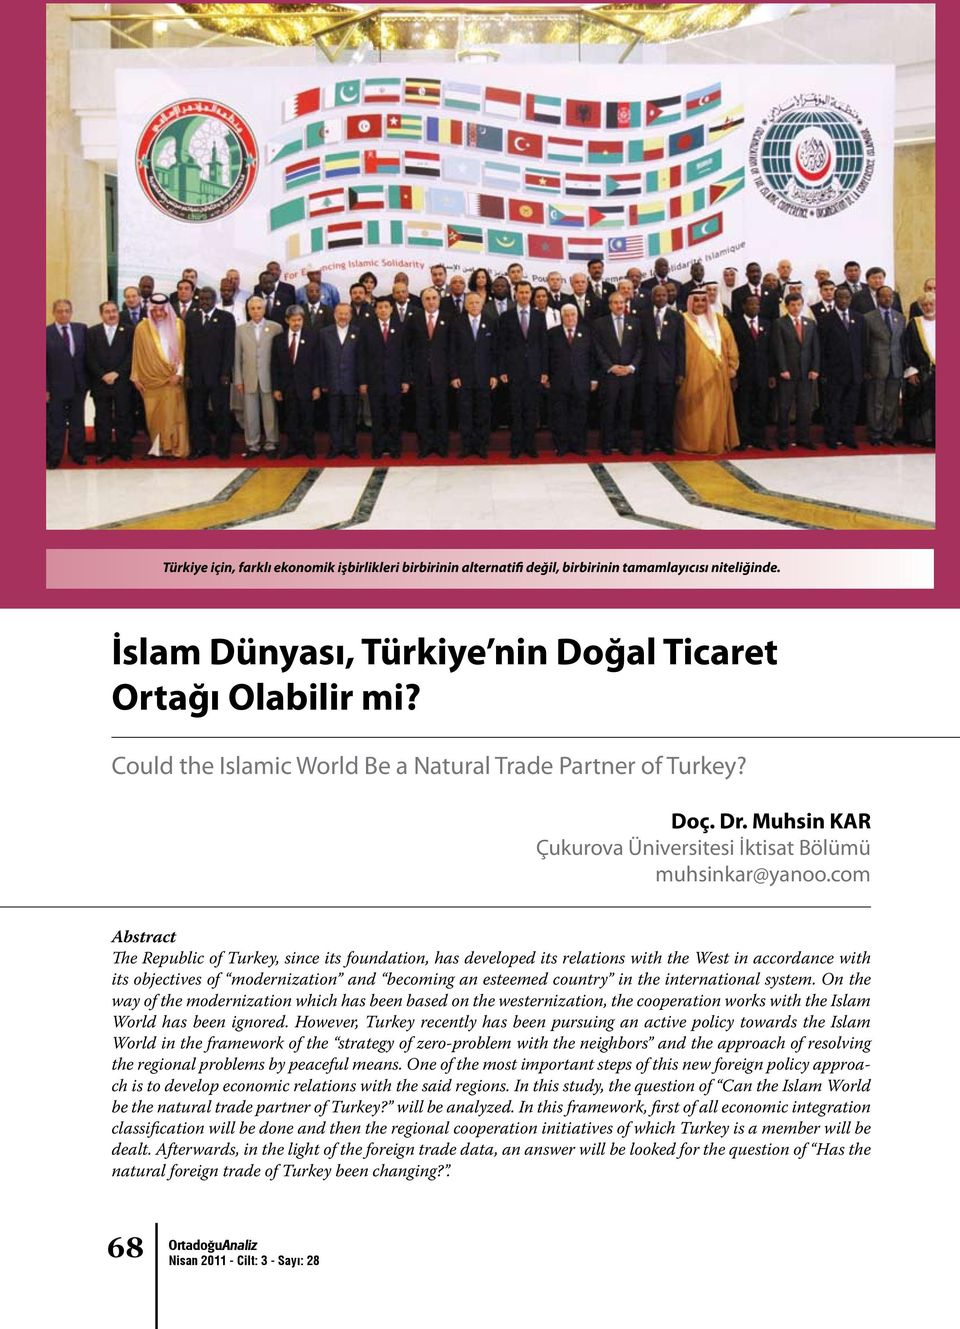 com Abstract The Republic of Turkey, since its foundation, has developed its relations with the West in accordance with its objectives of modernization and becoming an esteemed country in the